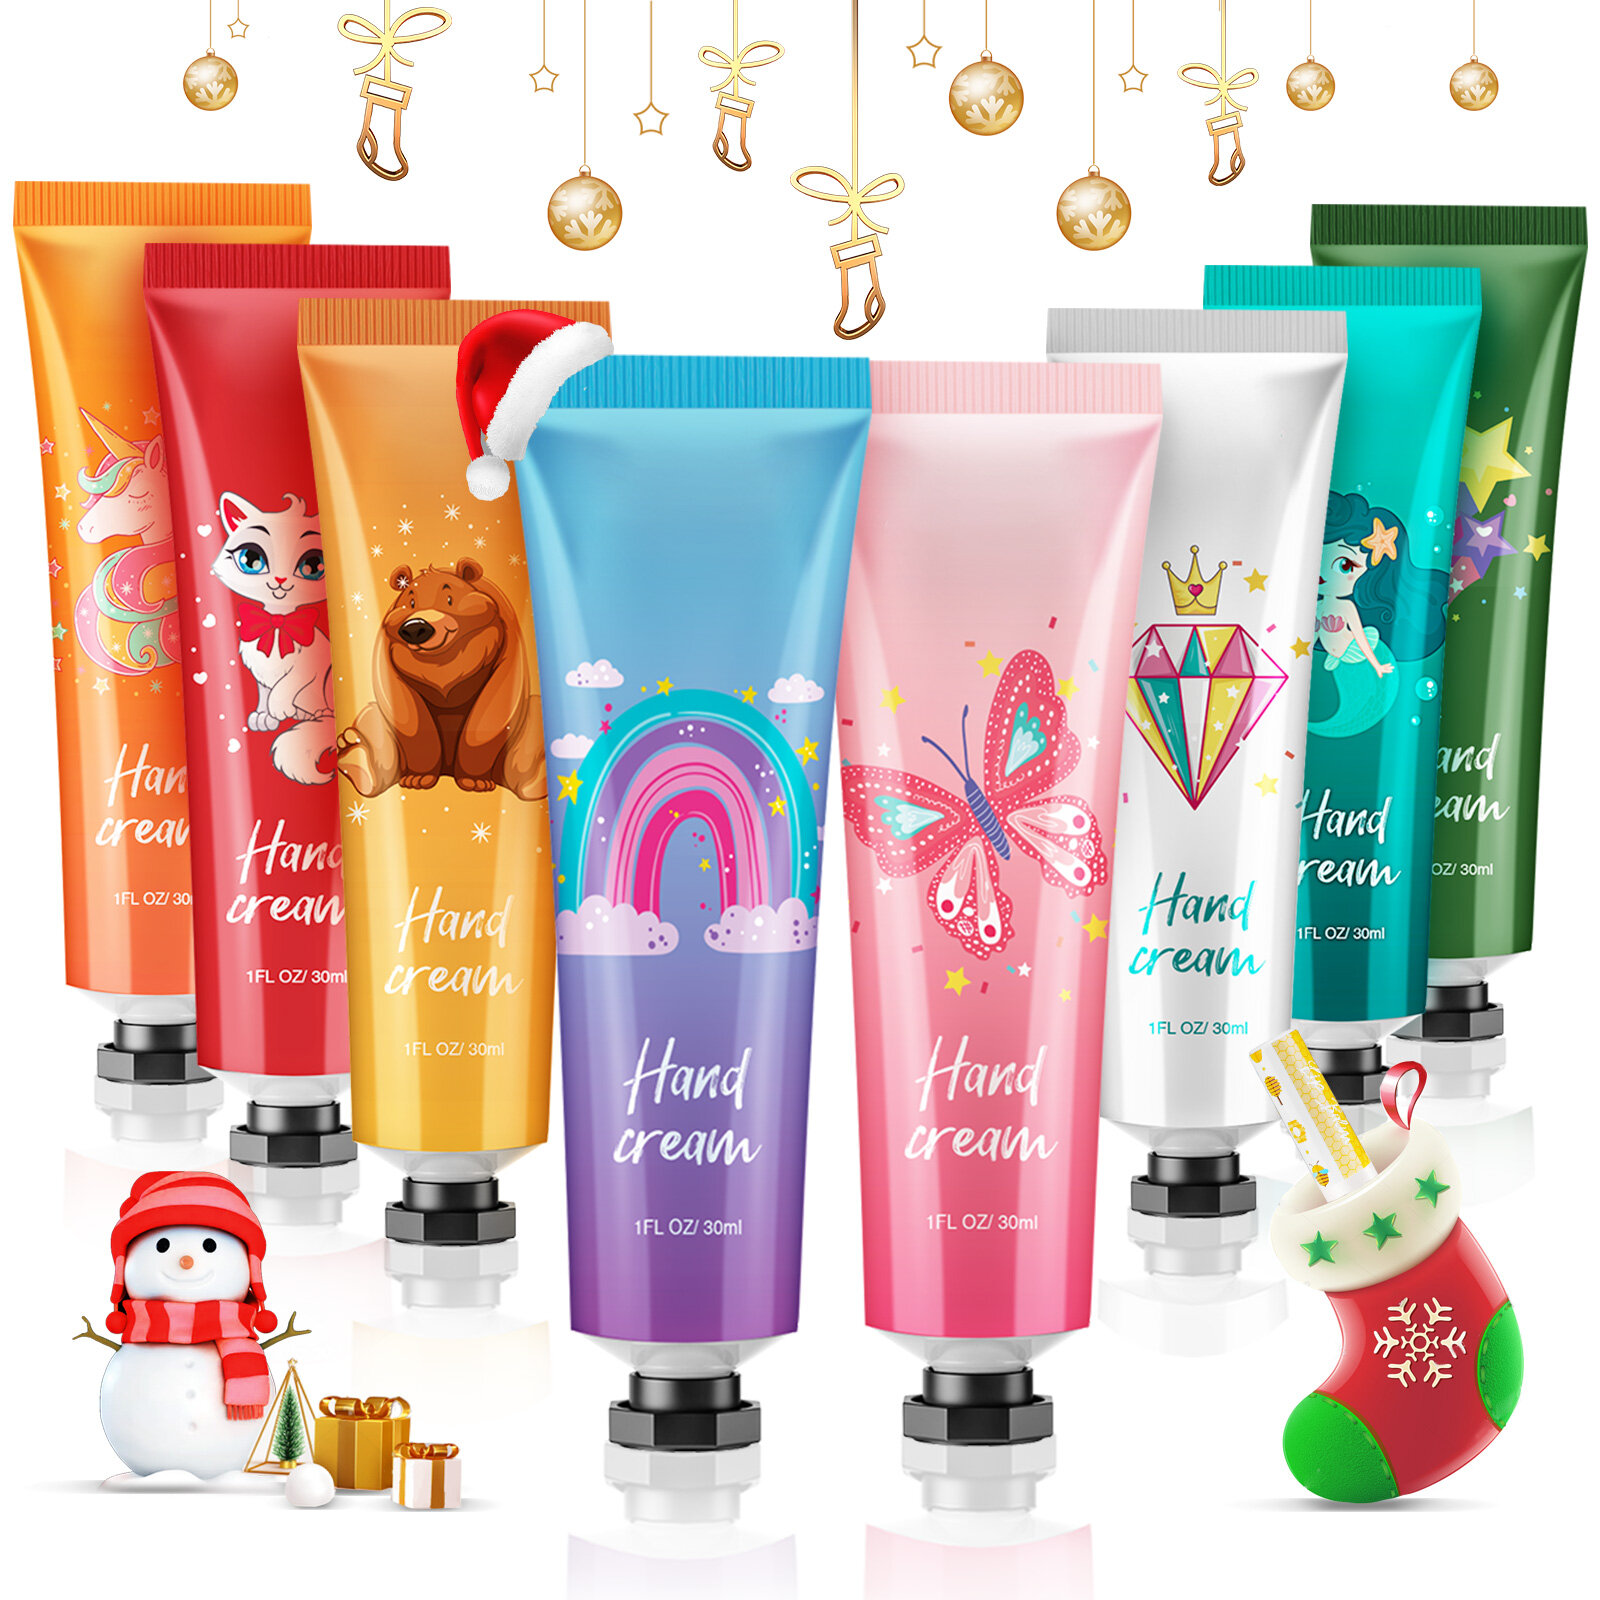 GLAMADOR Hand Cream Gift Set 9 Pcs Travel Size Hand Lotion 30ml with Lip Balm Hand Cream for Dry Cra